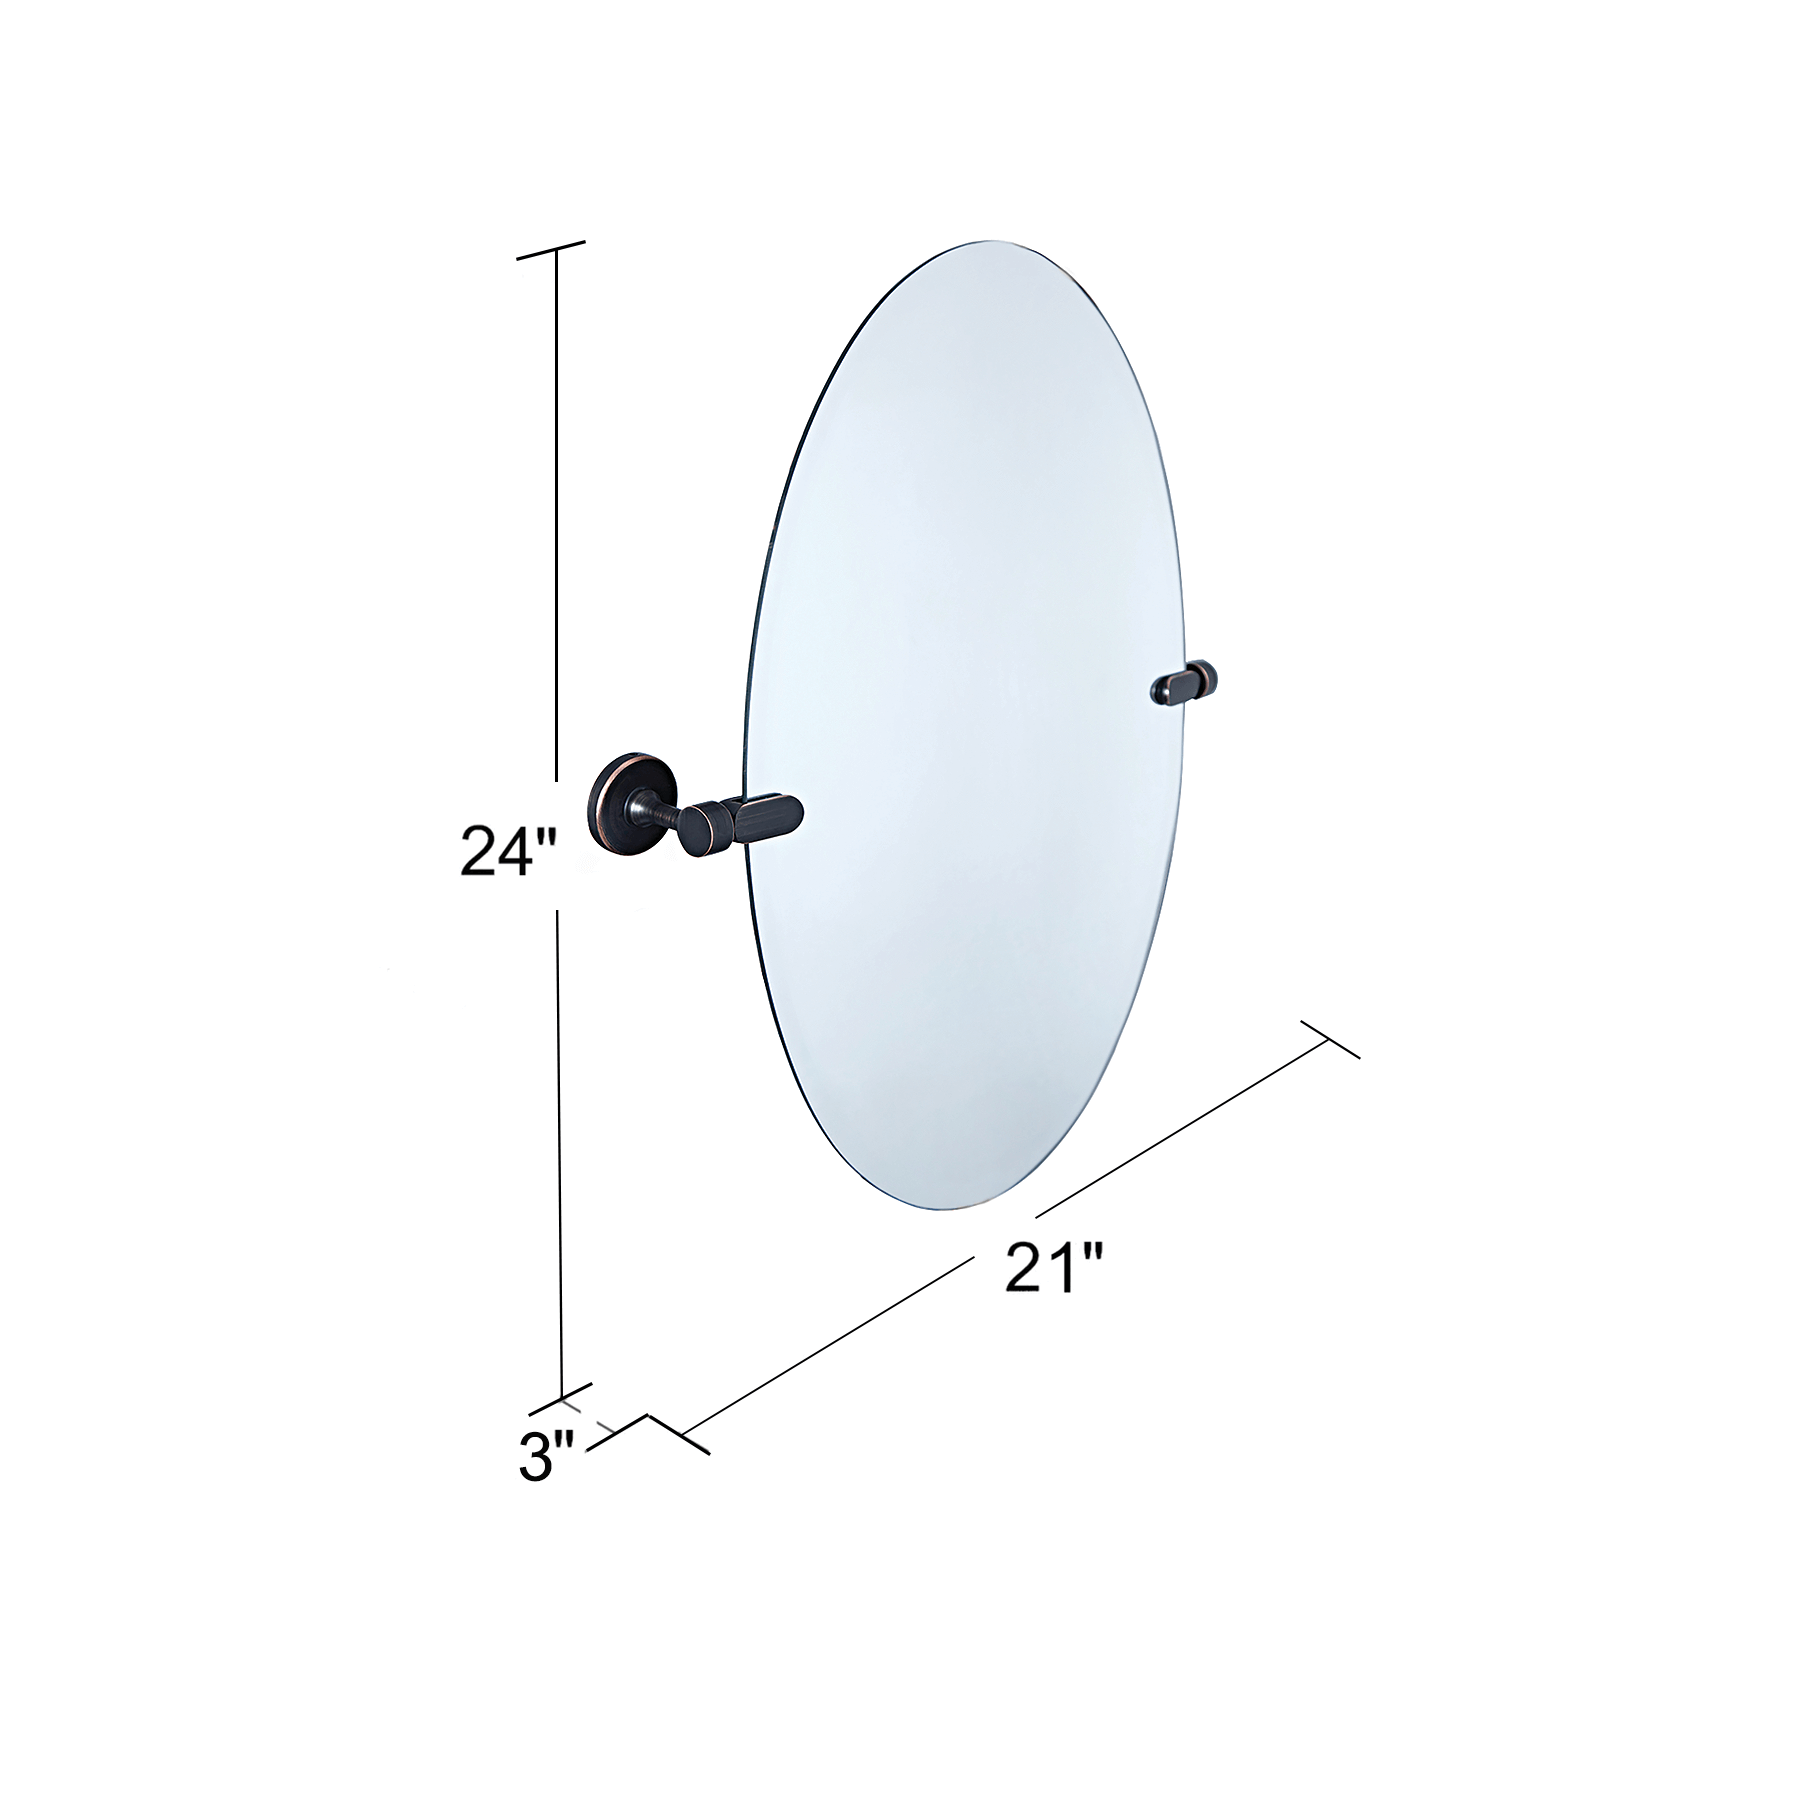 21''W x 24''H Oval Frameless Bathroom Pivot Mirror - Available in 3 Colors